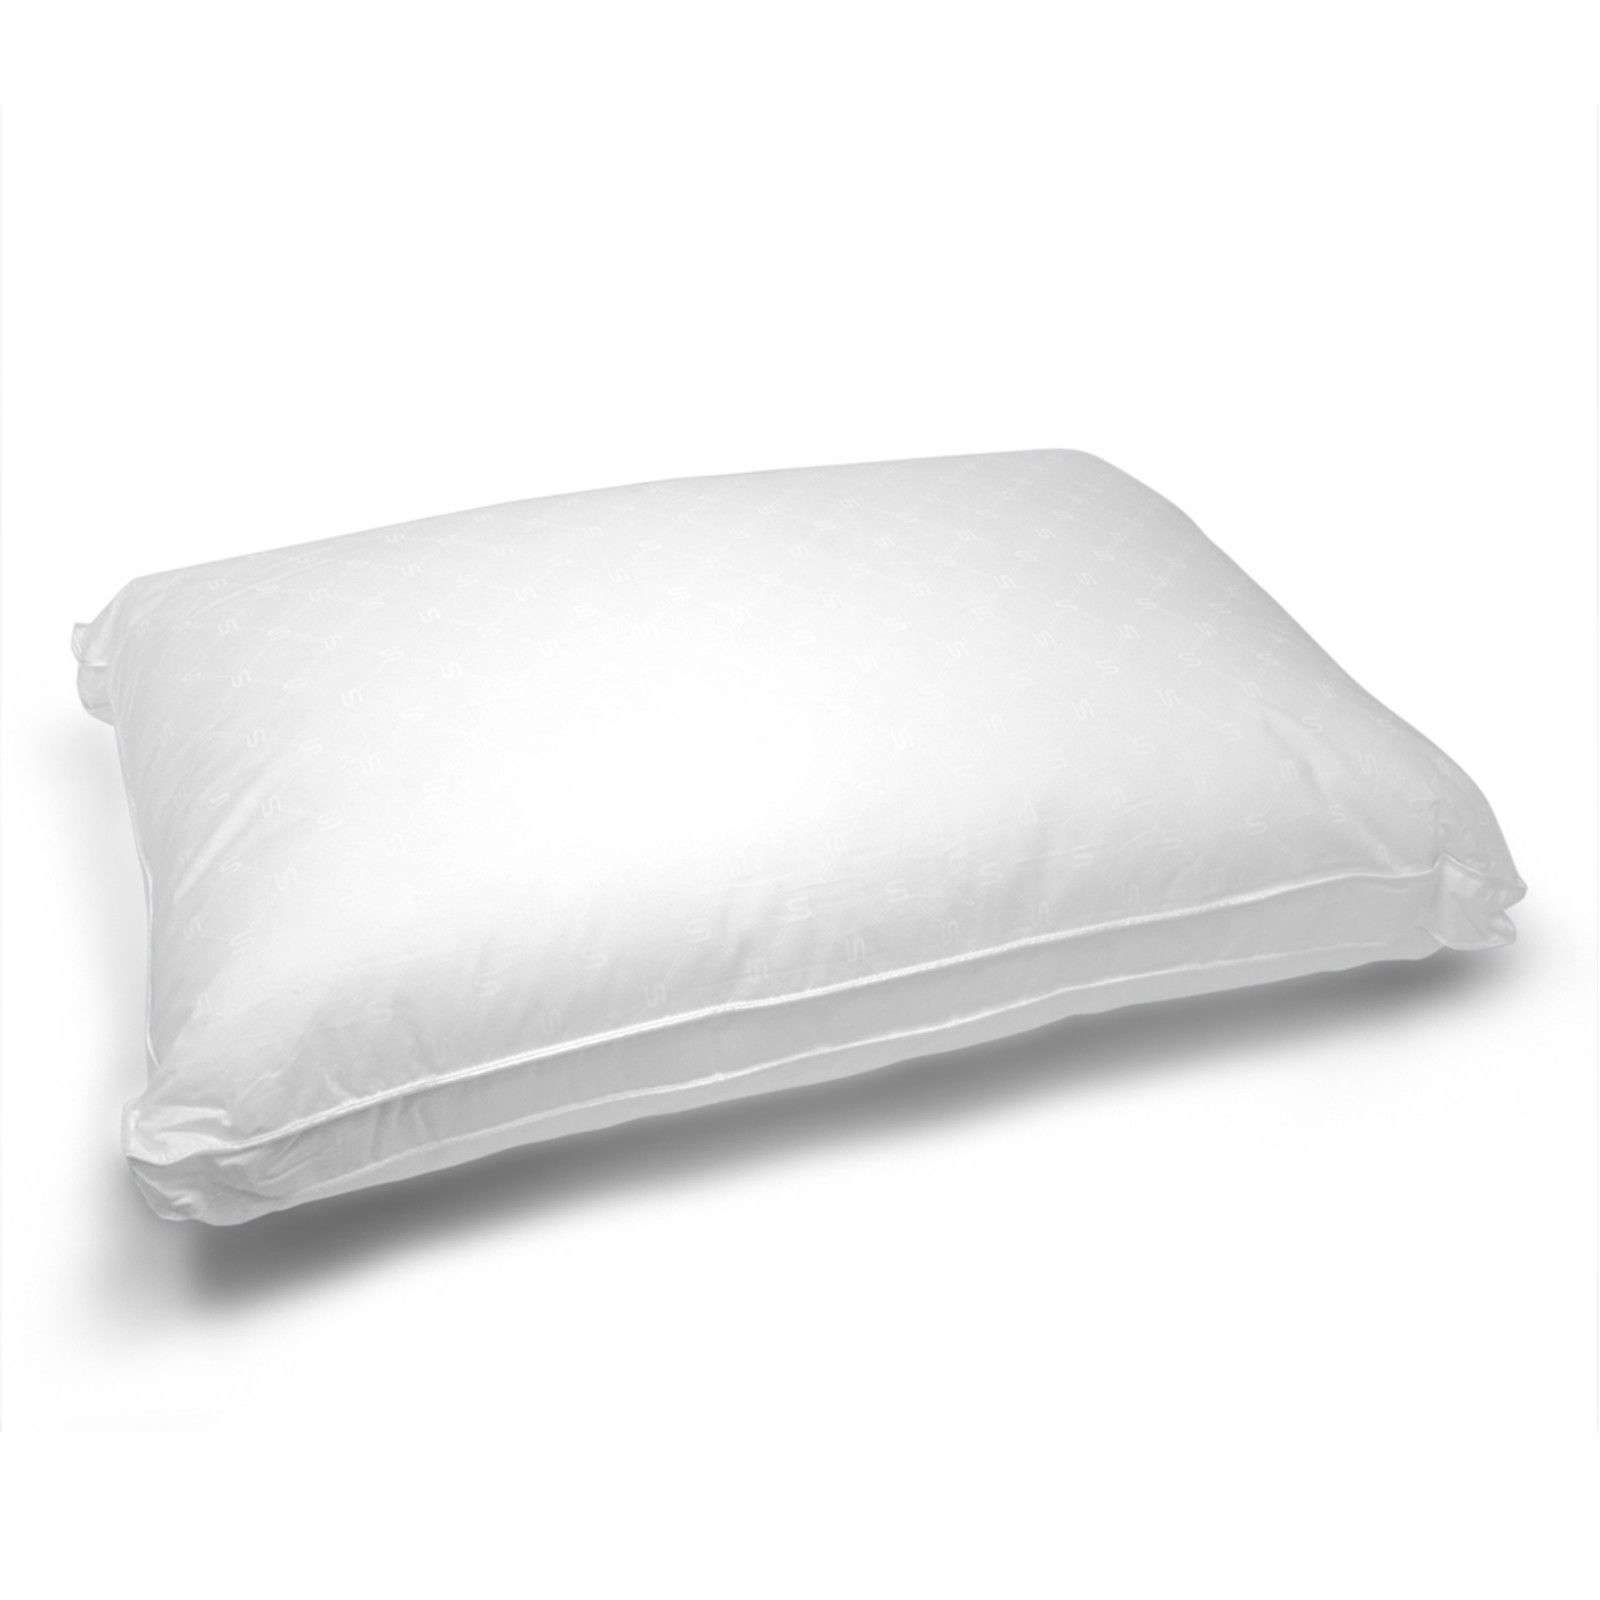 400 T/C Cotton Cover Natural Merino Wool Filled 2 x Pillows 1000G